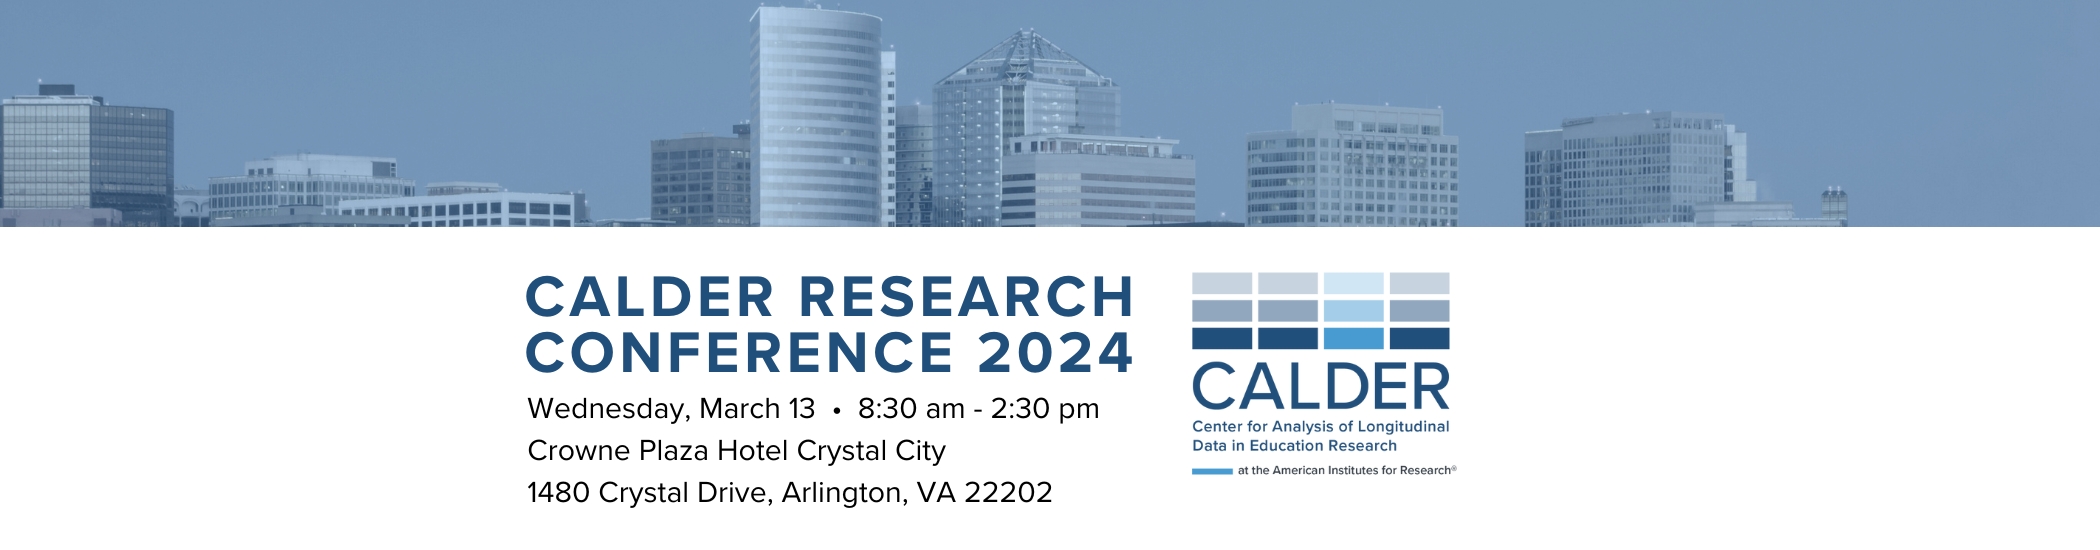 CALDER Research Conference 2024